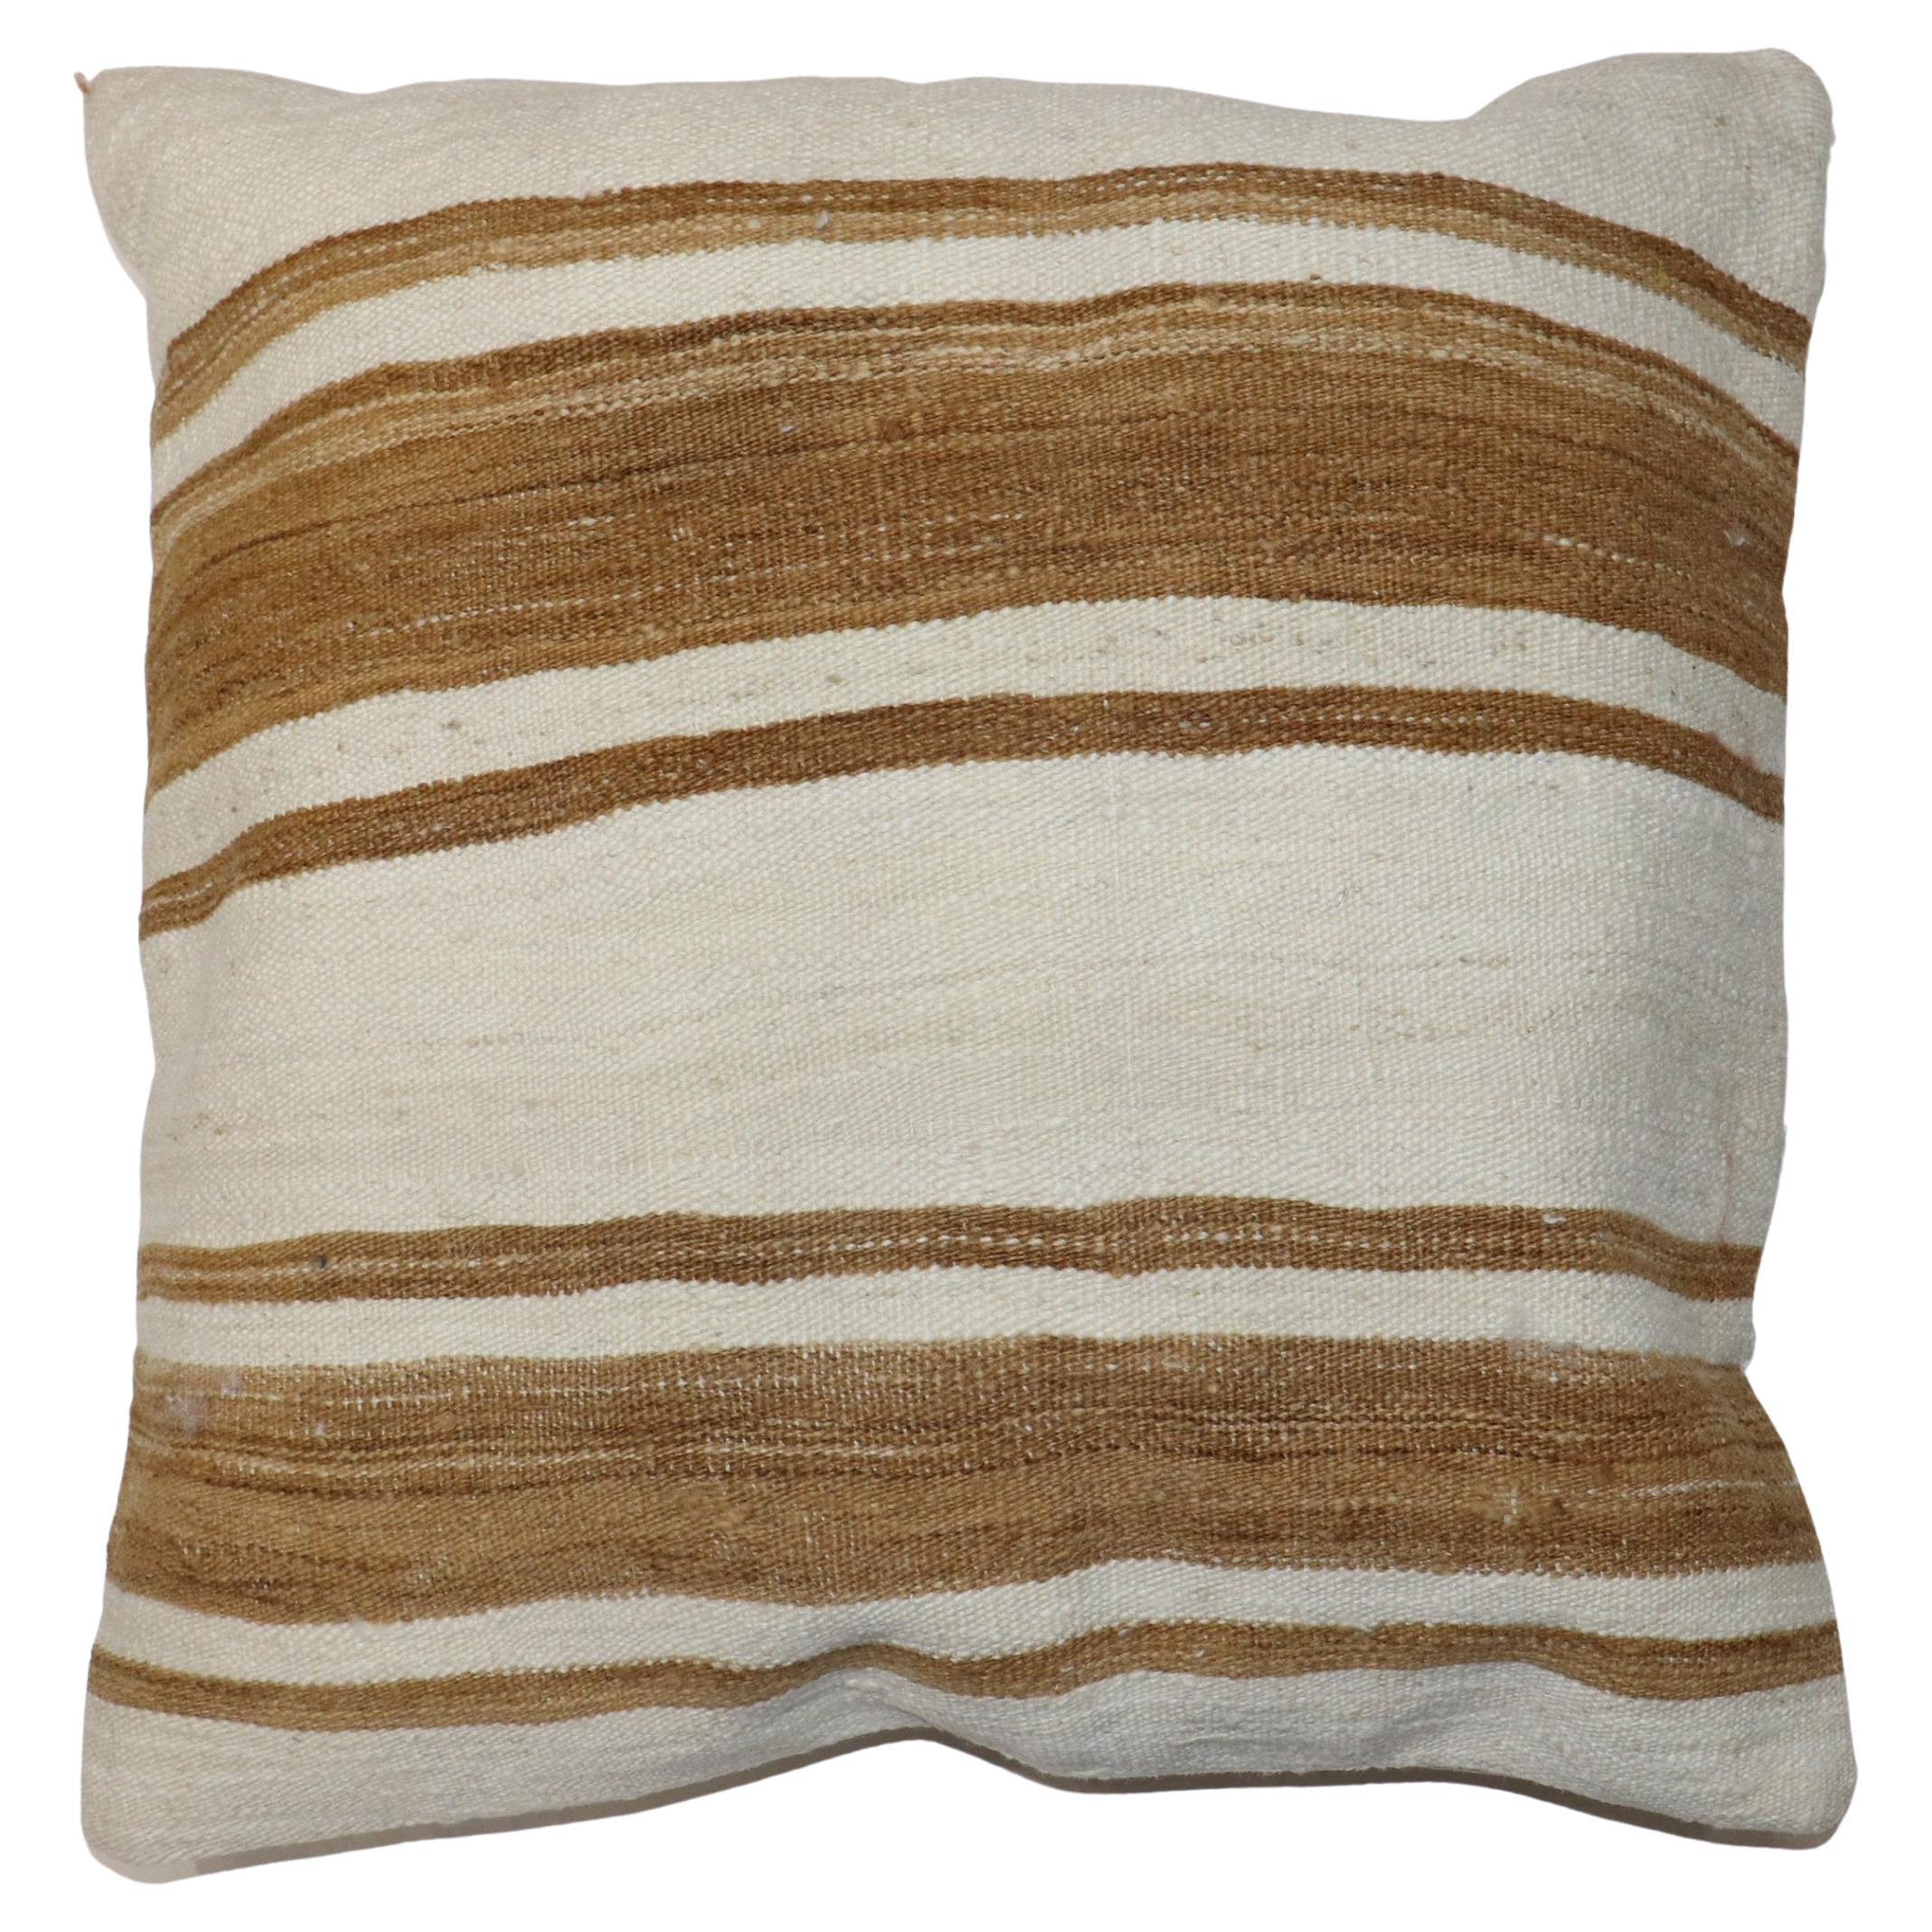 Large Square Turkish Kilim White Brown Pillow For Sale